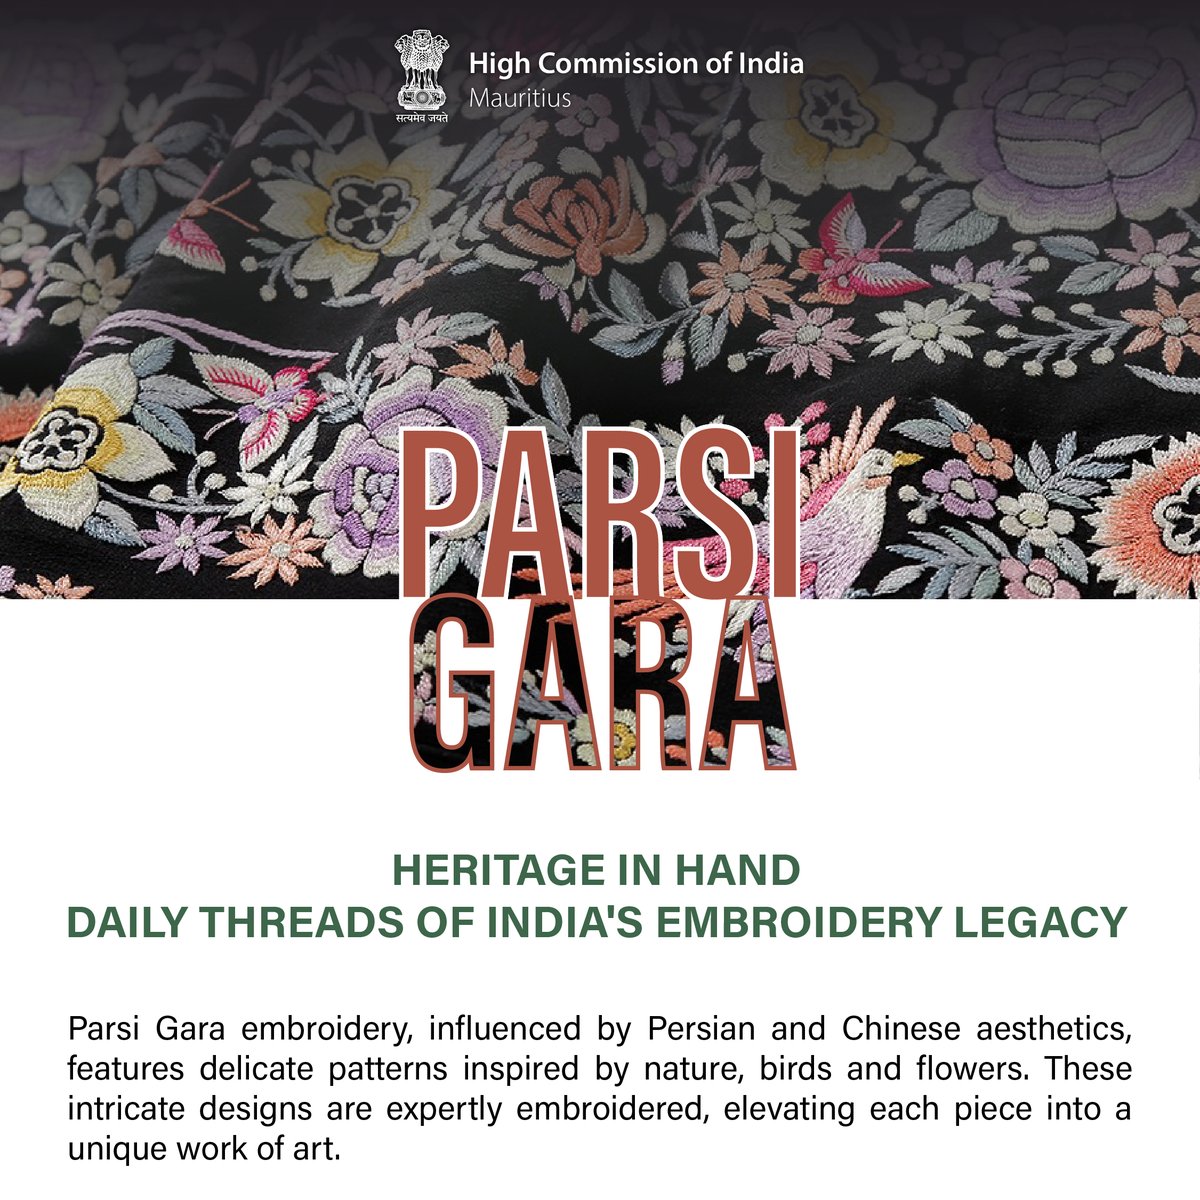 Today, join us as we unveil the allure of Parsi Gara Embroidery!

Drawing inspiration from Persian and Chinese aesthetics, this embroidery masterpiece beautifully captures delicate patterns inspired by nature, birds and flowers.

#EmbroideryArt #ParsiGaraEmbroidery